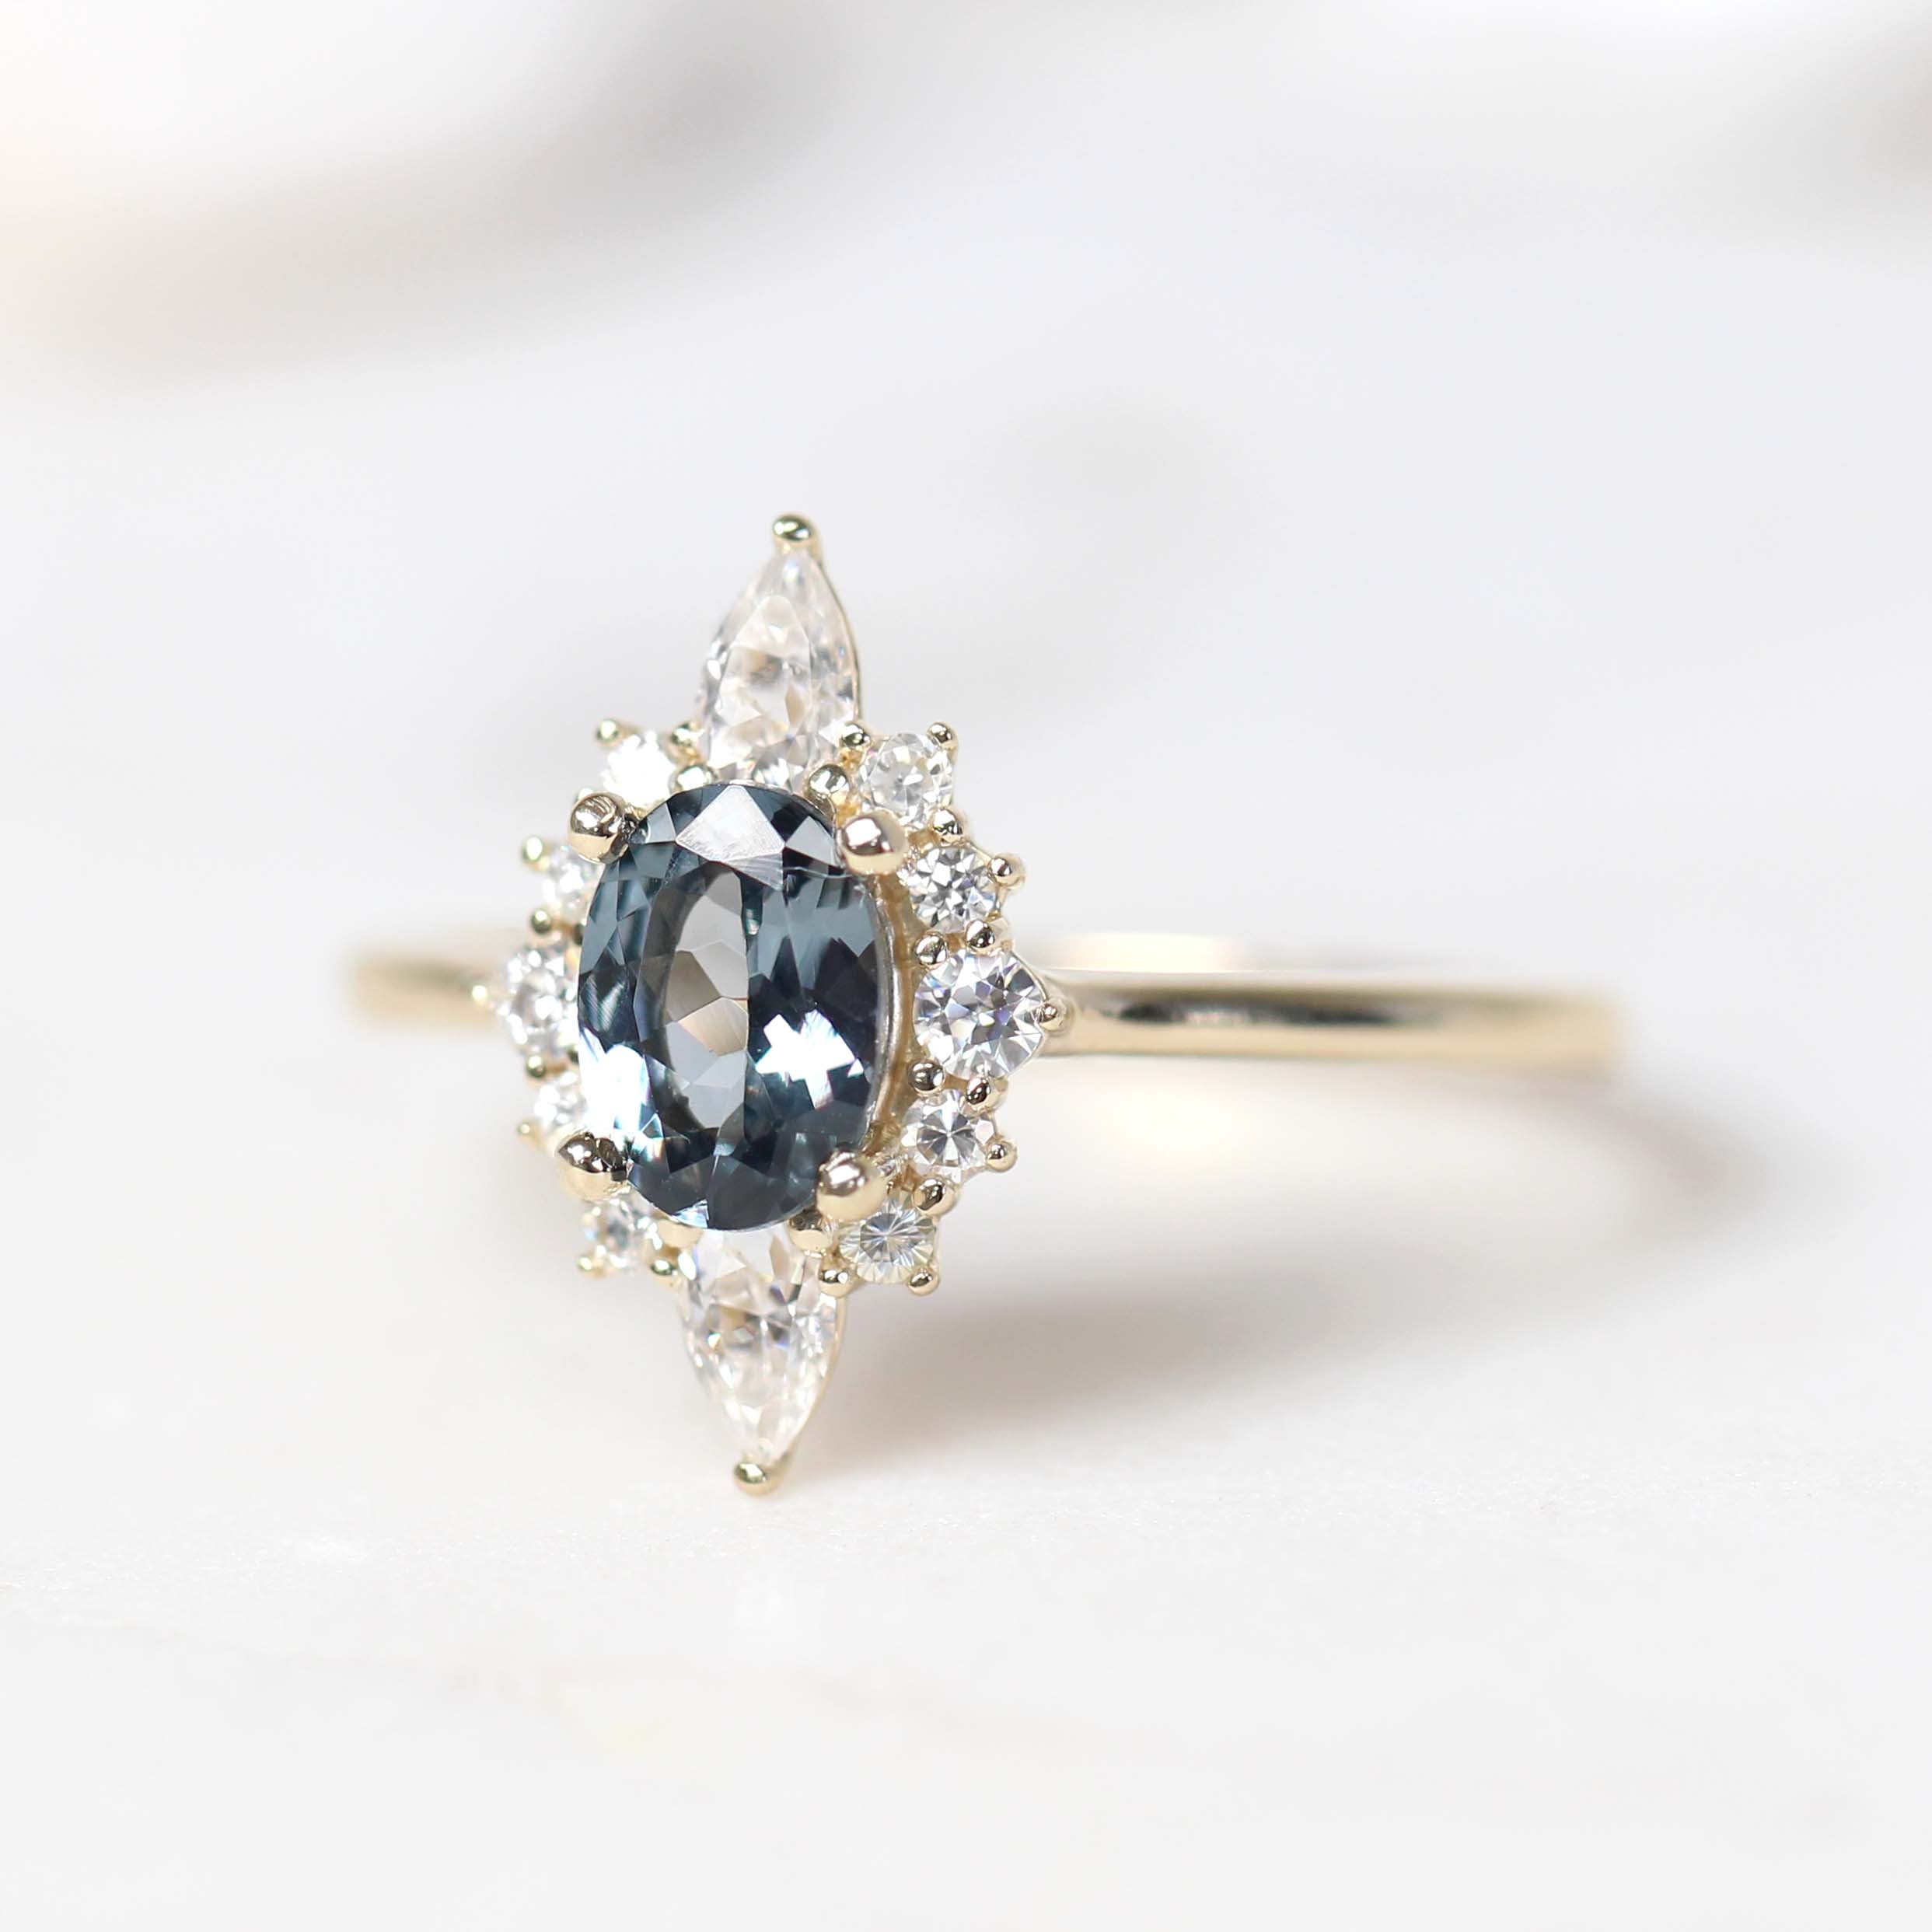 Noelle Ring with a 0.88 Carat Blue Gray Oval Spinel and White Accent Moissanites in 14k Yellow Gold - Ready to Size and Ship - Midwinter Co. Alternative Bridal Rings and Modern Fine Jewelry